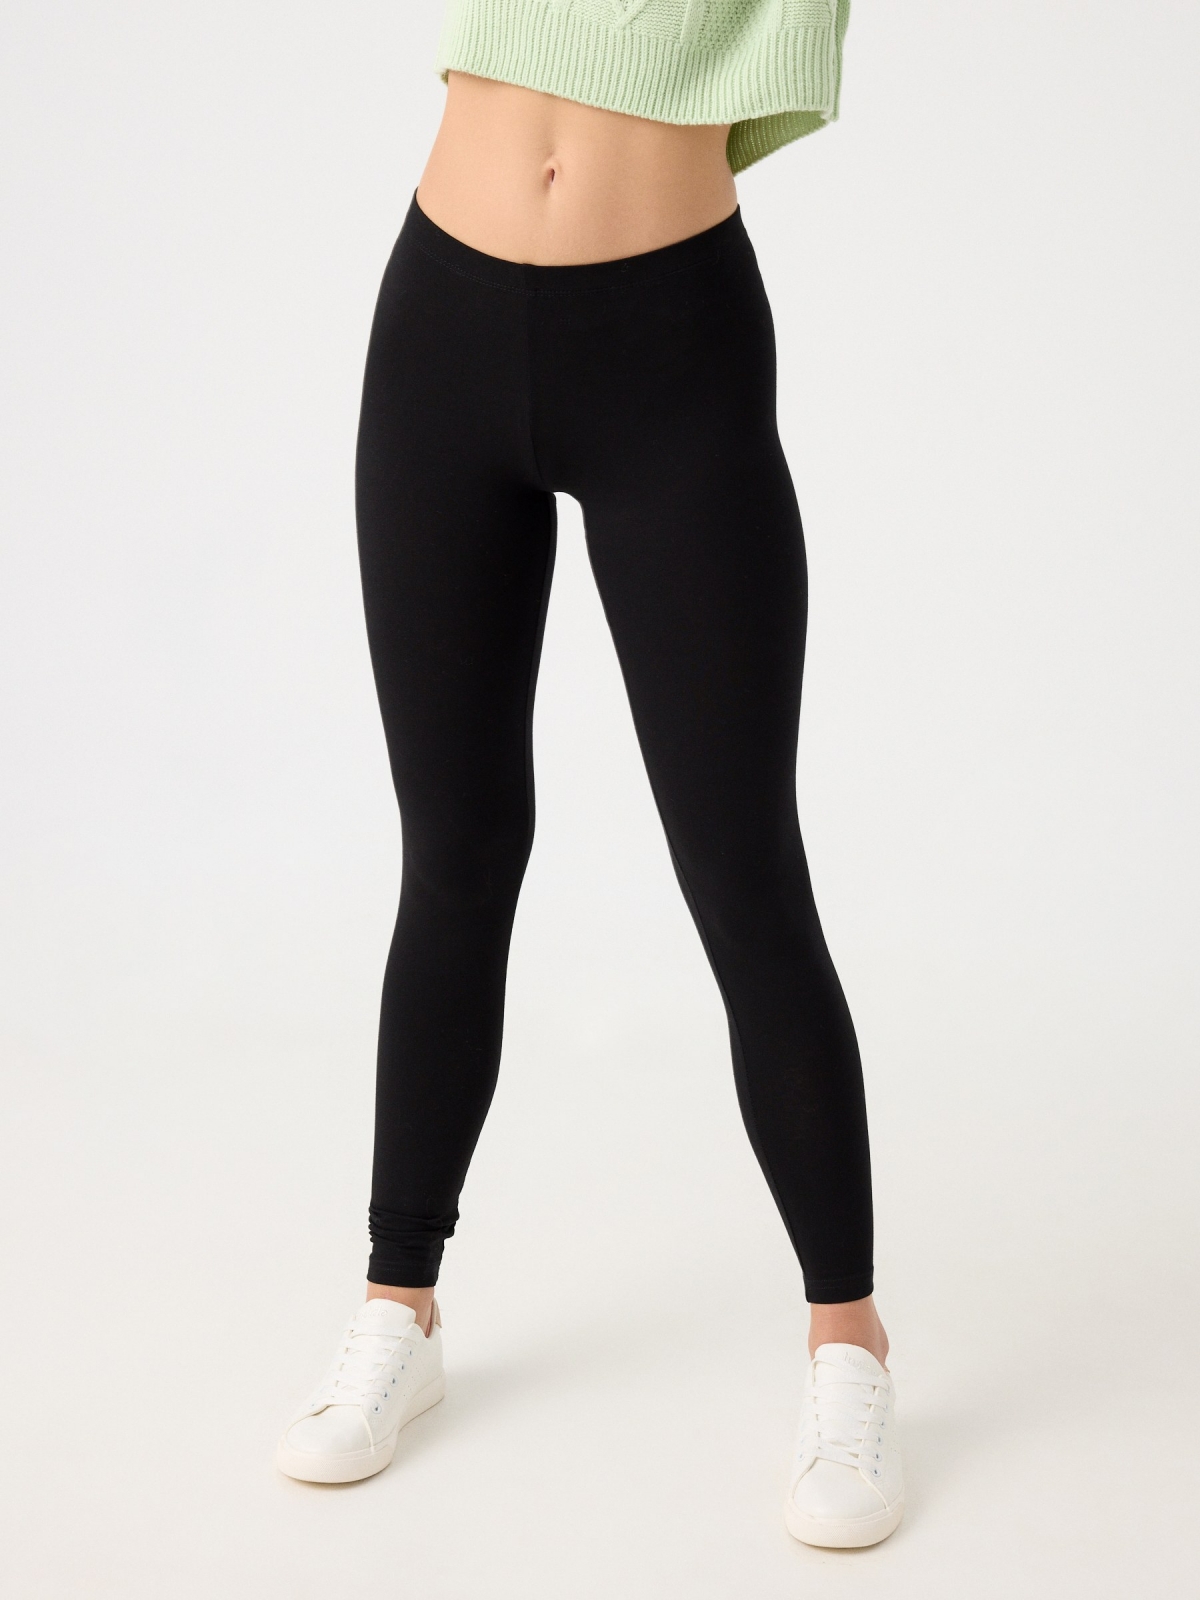 Basic black high waisted leggings black middle front view